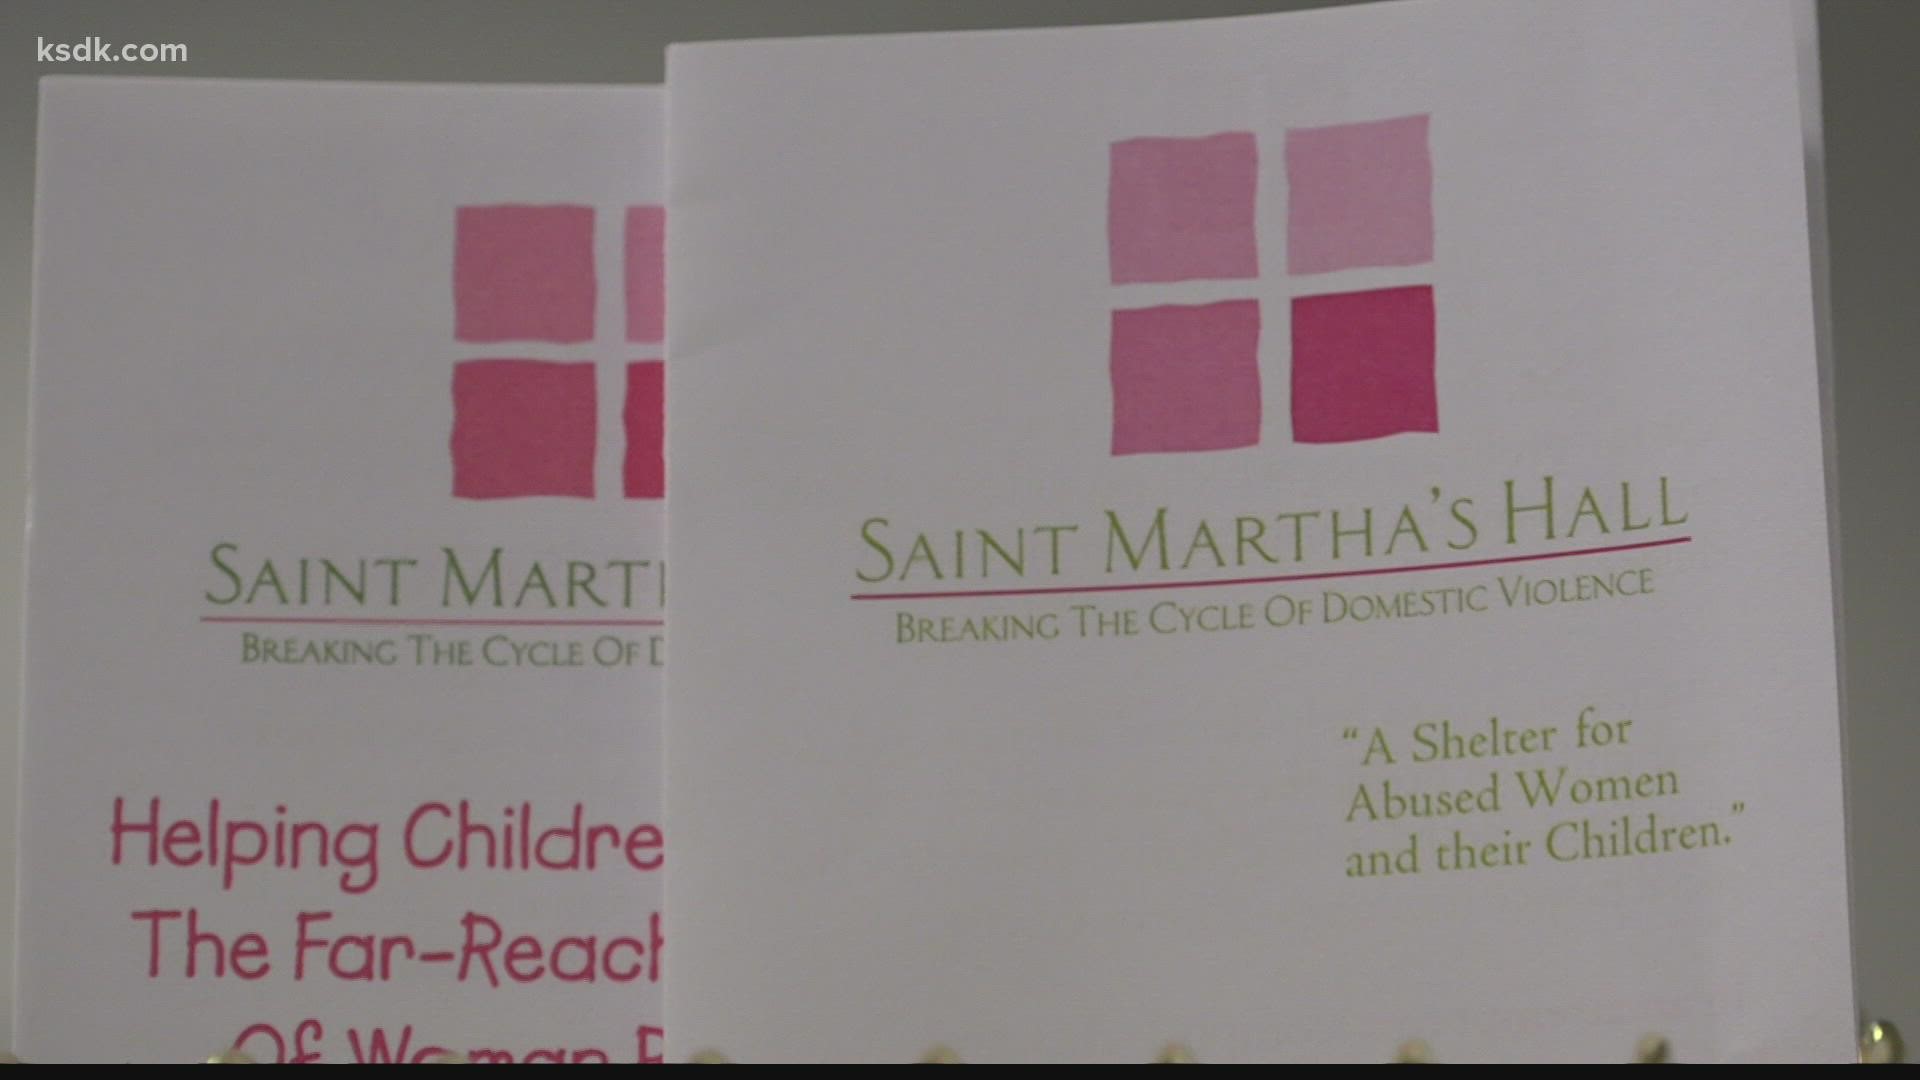 St. Martha's Hall is hosting a 24-hour online fundraiser. The agency's mission is to help break the cycle of domestic abuse.